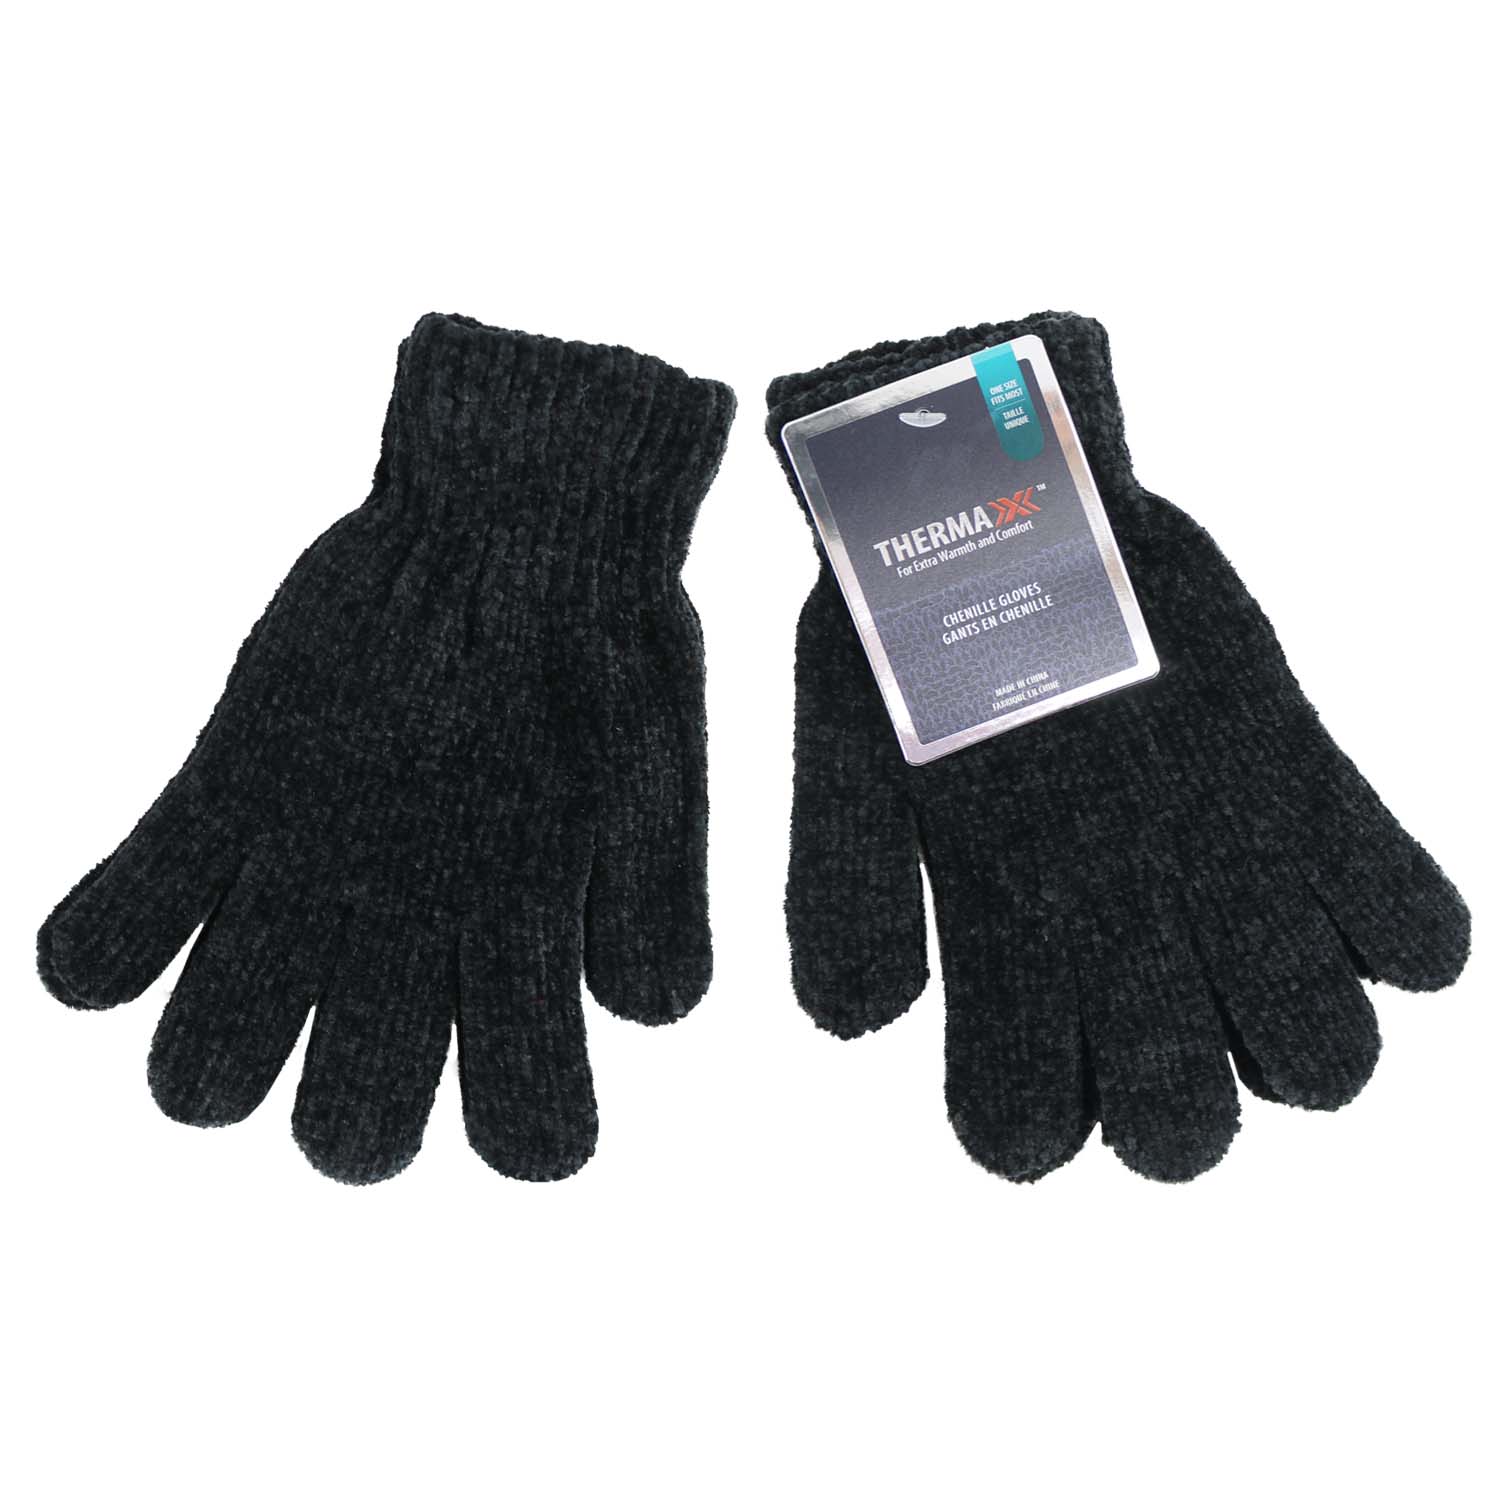 Unisex Wholesale Chenille Gloves in 7 Assorted Colors - Bulk Case of 96 Pairs